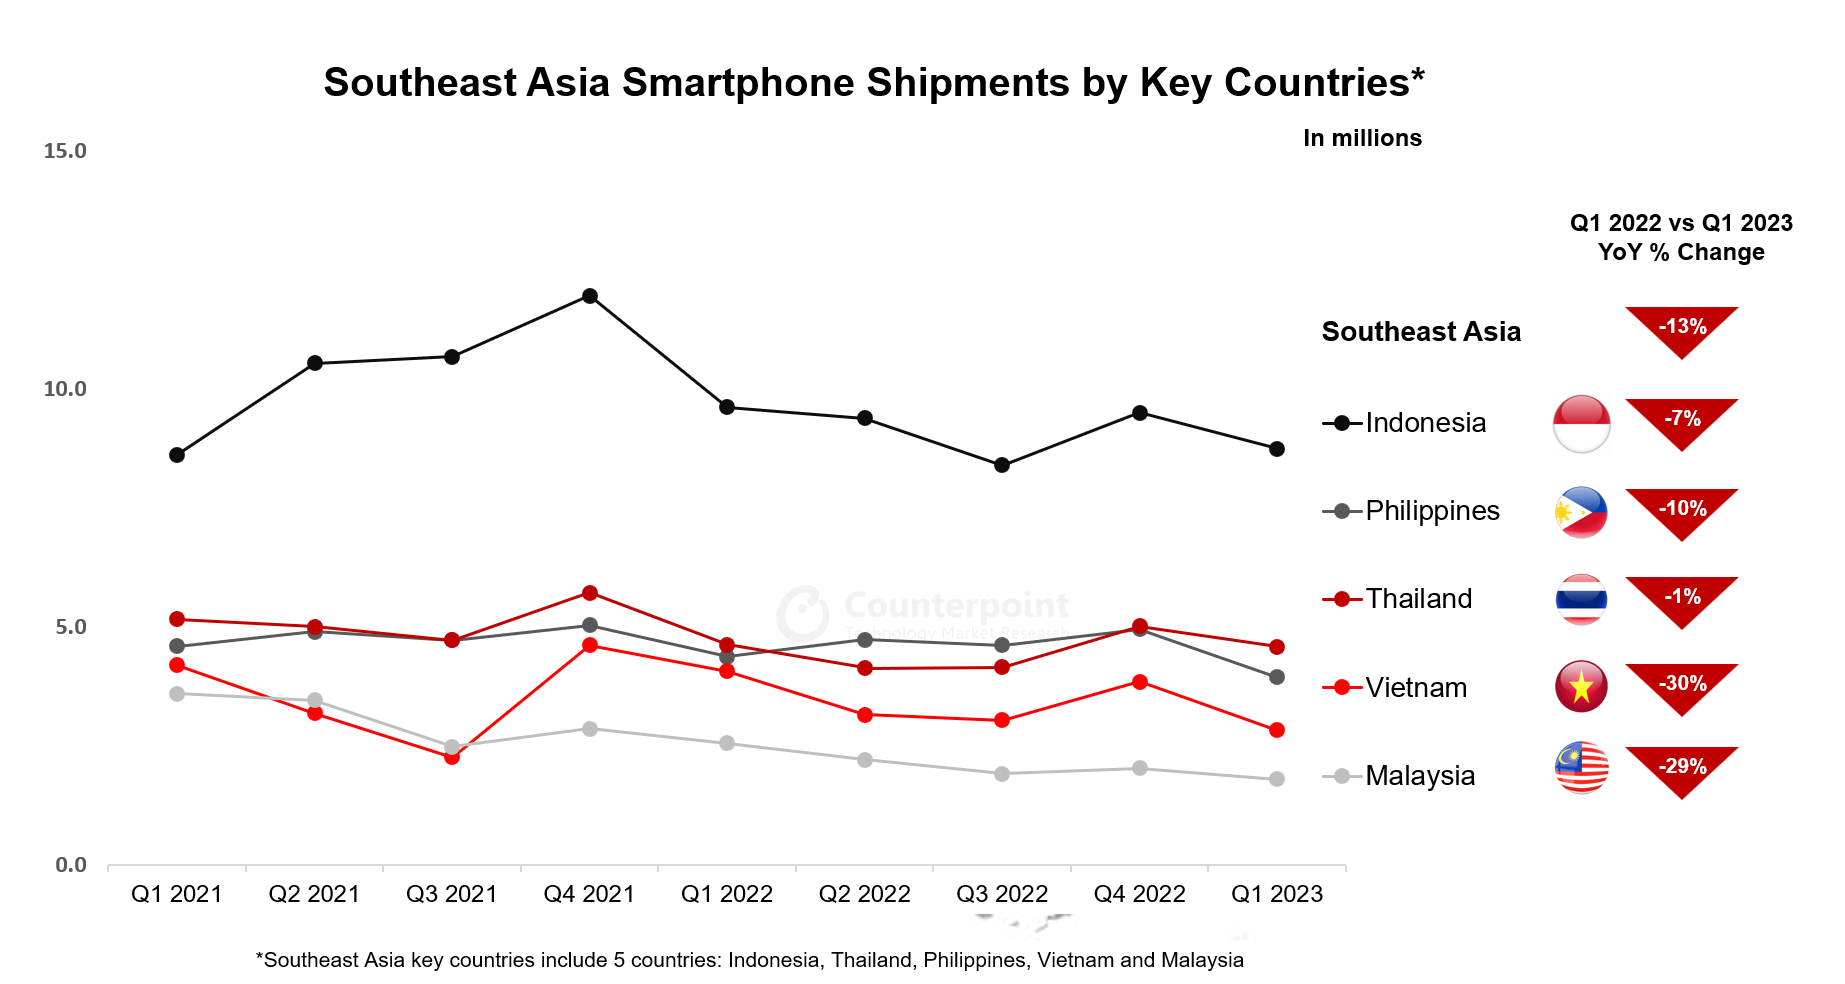 Southeast Asia Smartphone Shipments by Key Countries